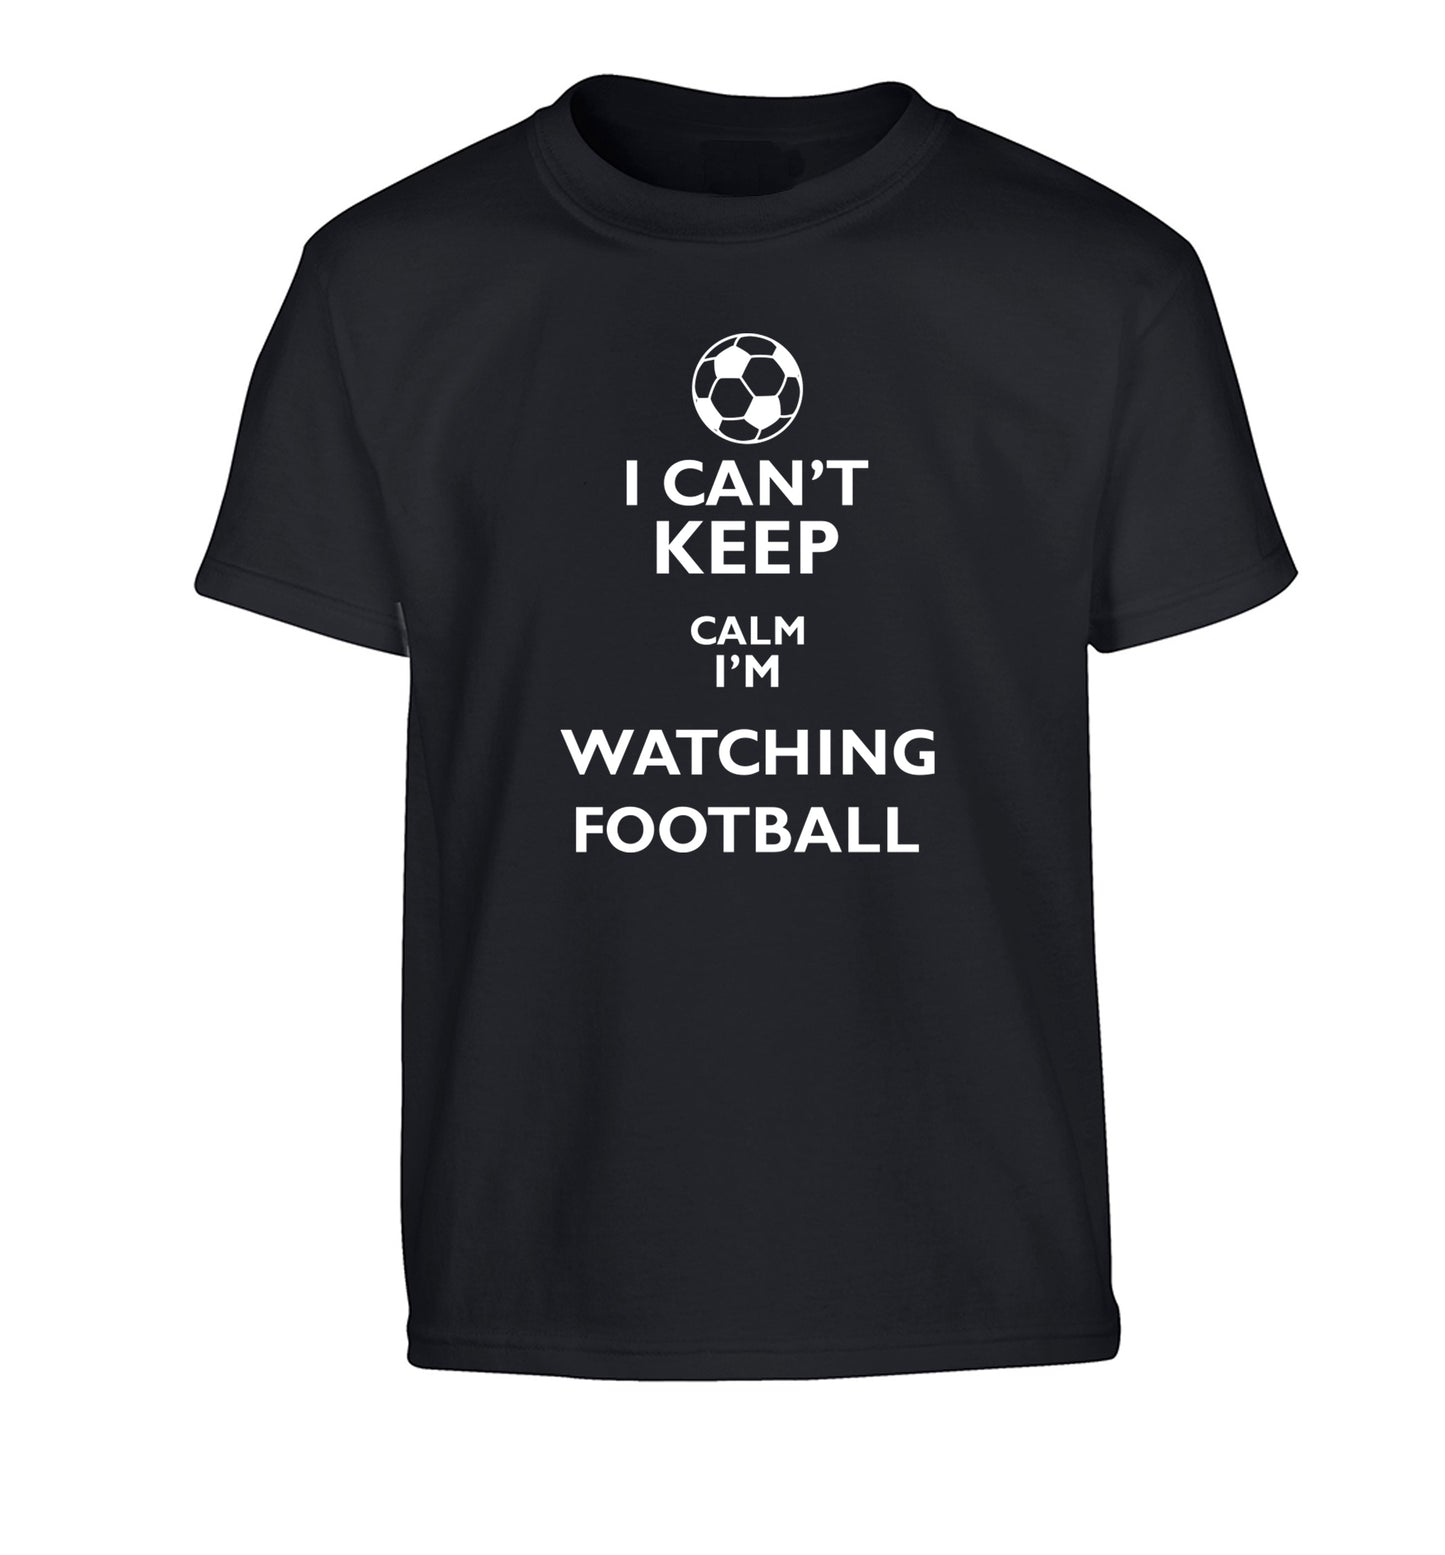 I can't keep calm I'm watching the football Children's black Tshirt 12-14 Years